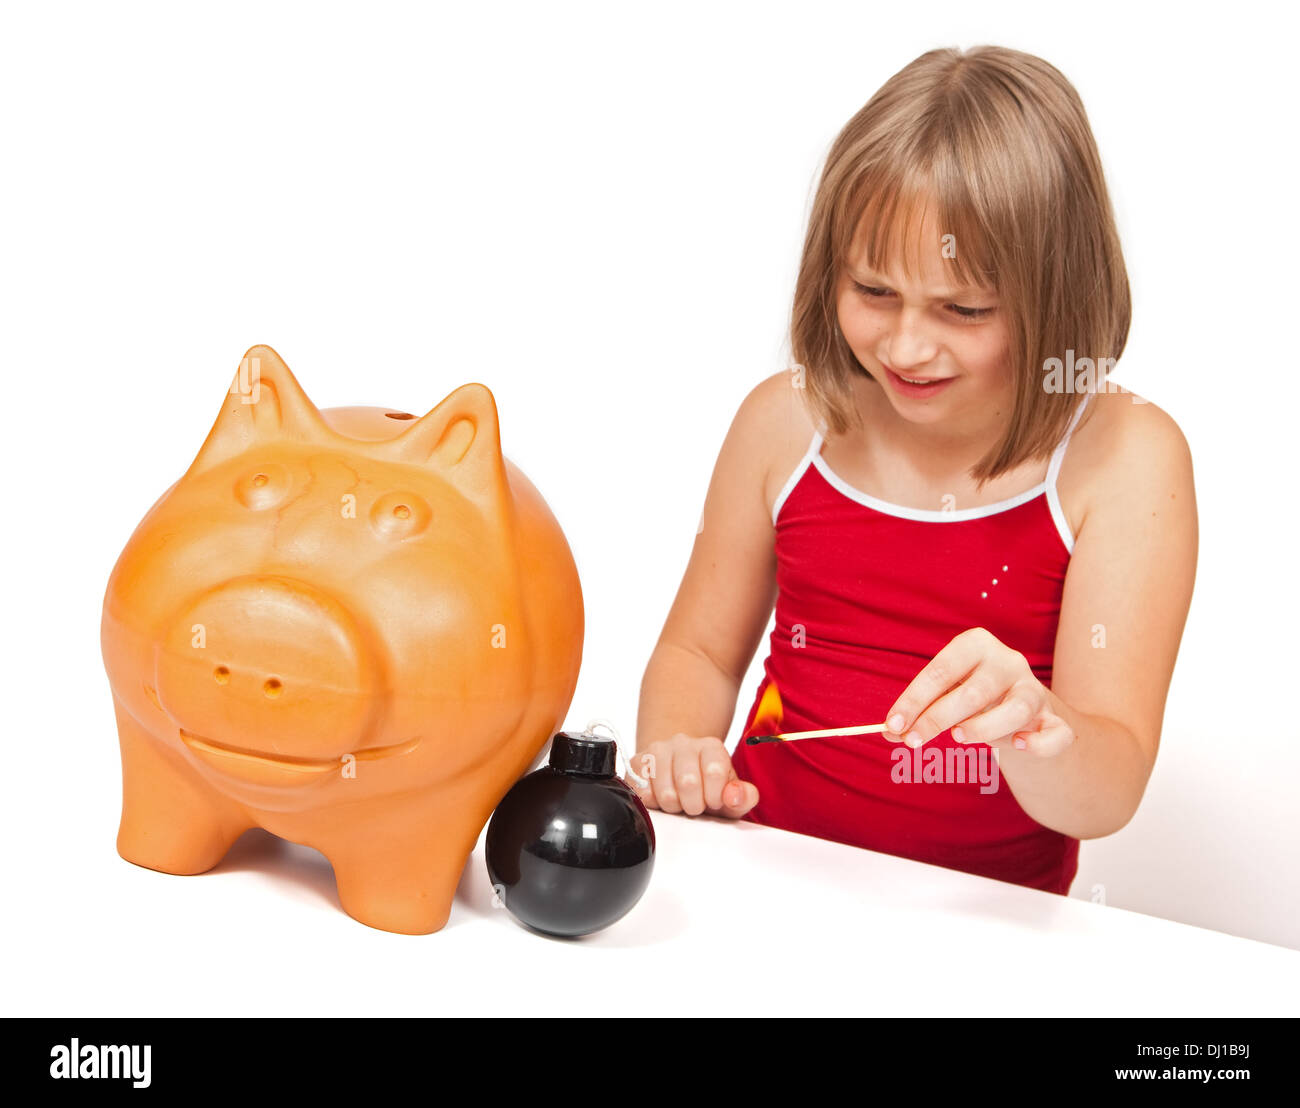 Girl preparing to explode piggy bank with bomb Stock Photo